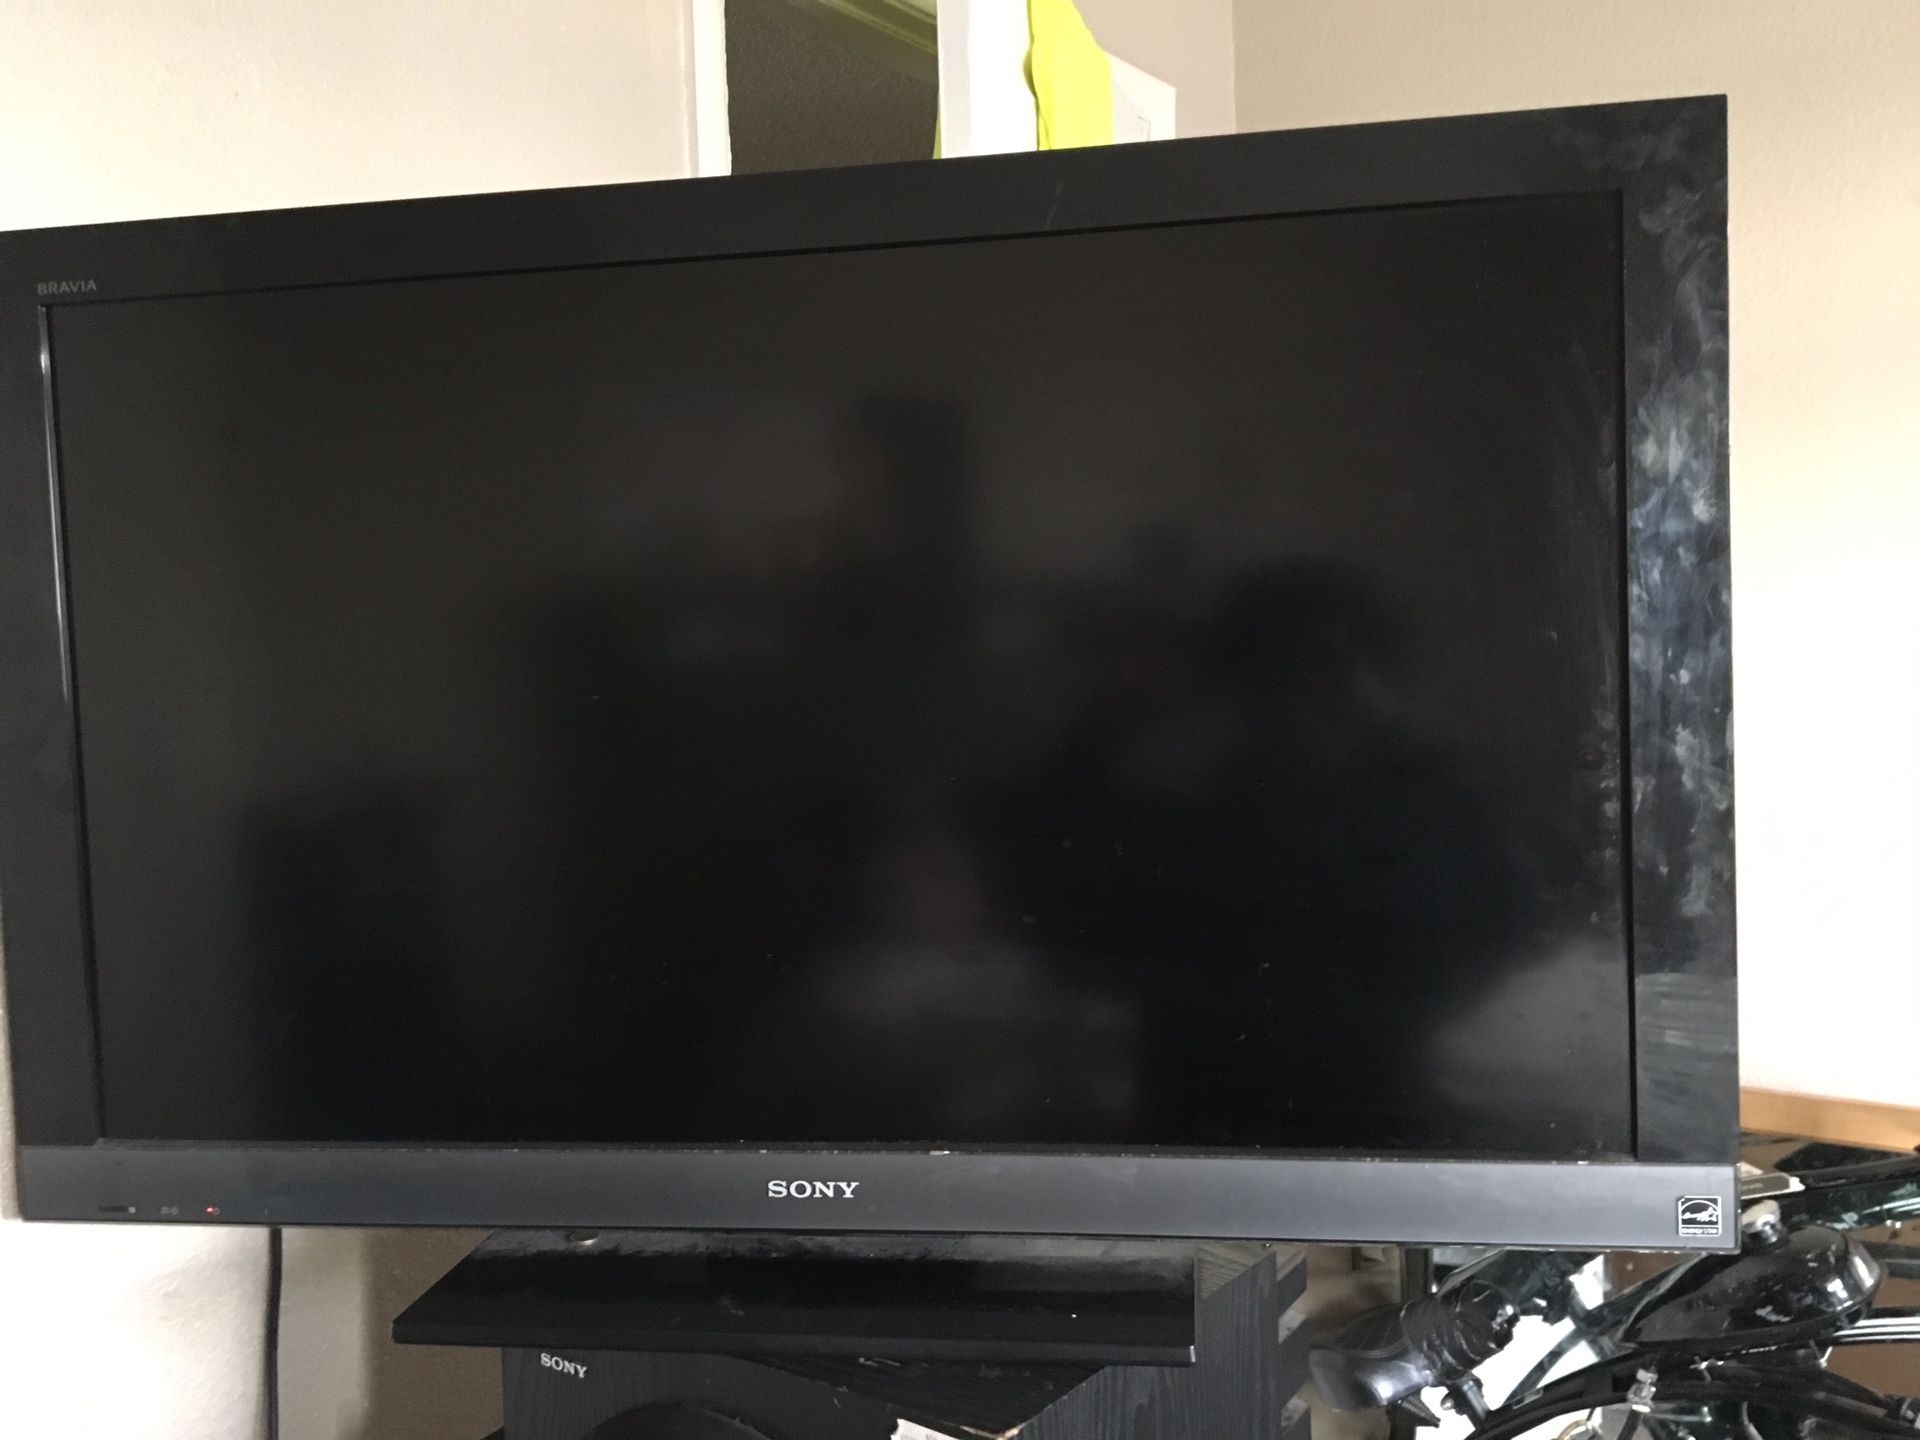 Sony 40 inch tv and active subwoofer